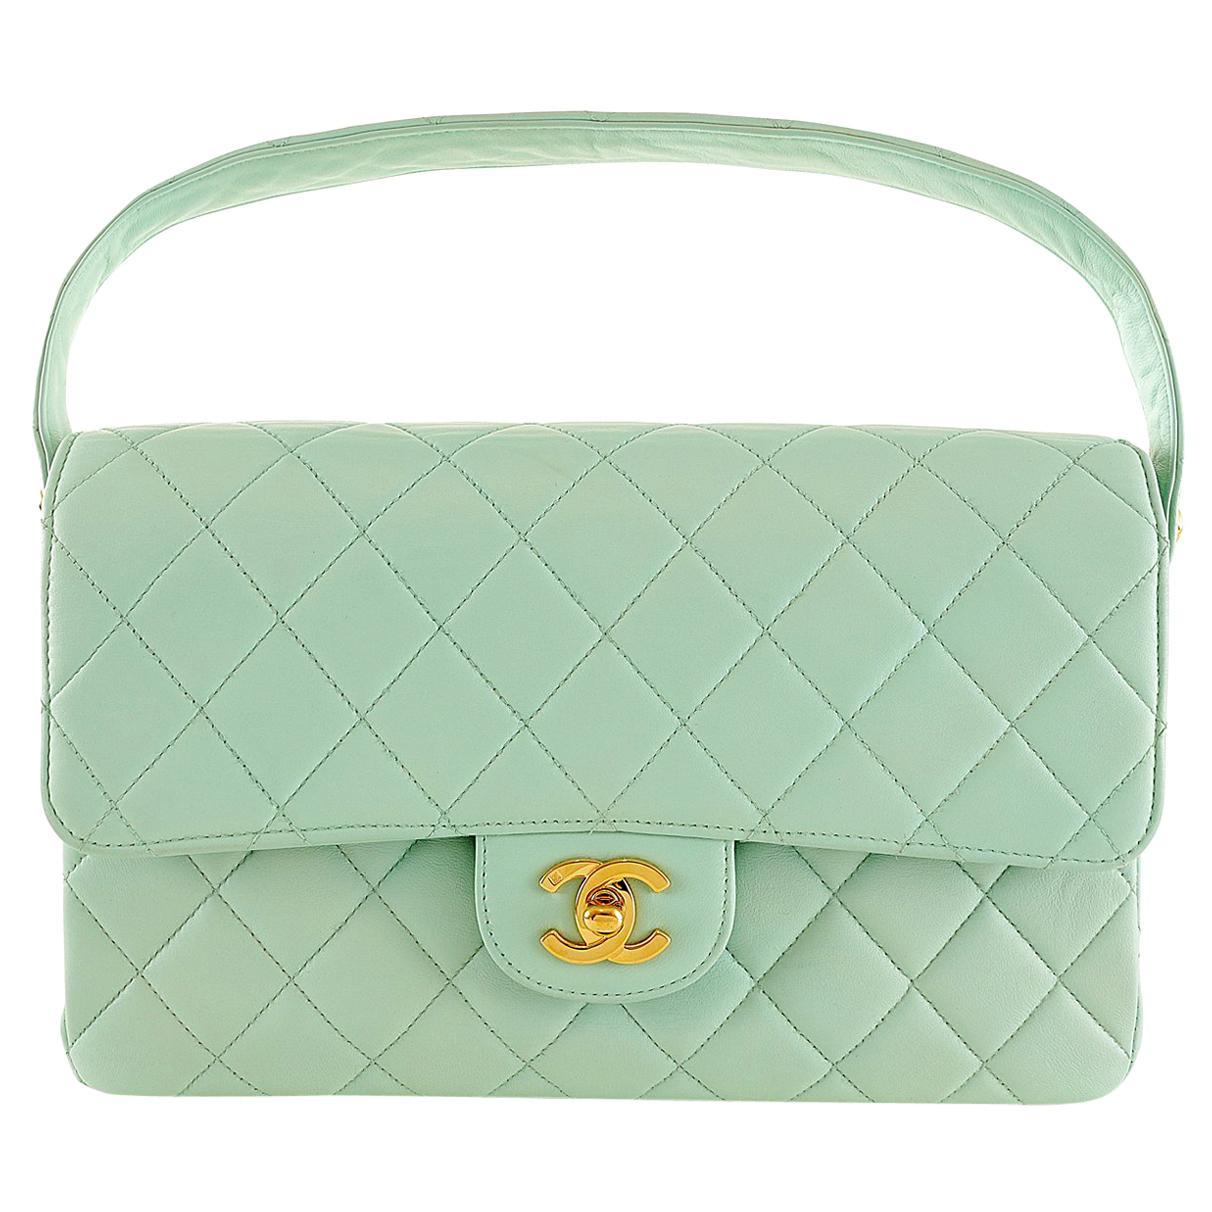 Chanel Mint Green Leather Double Sided Classic Bag